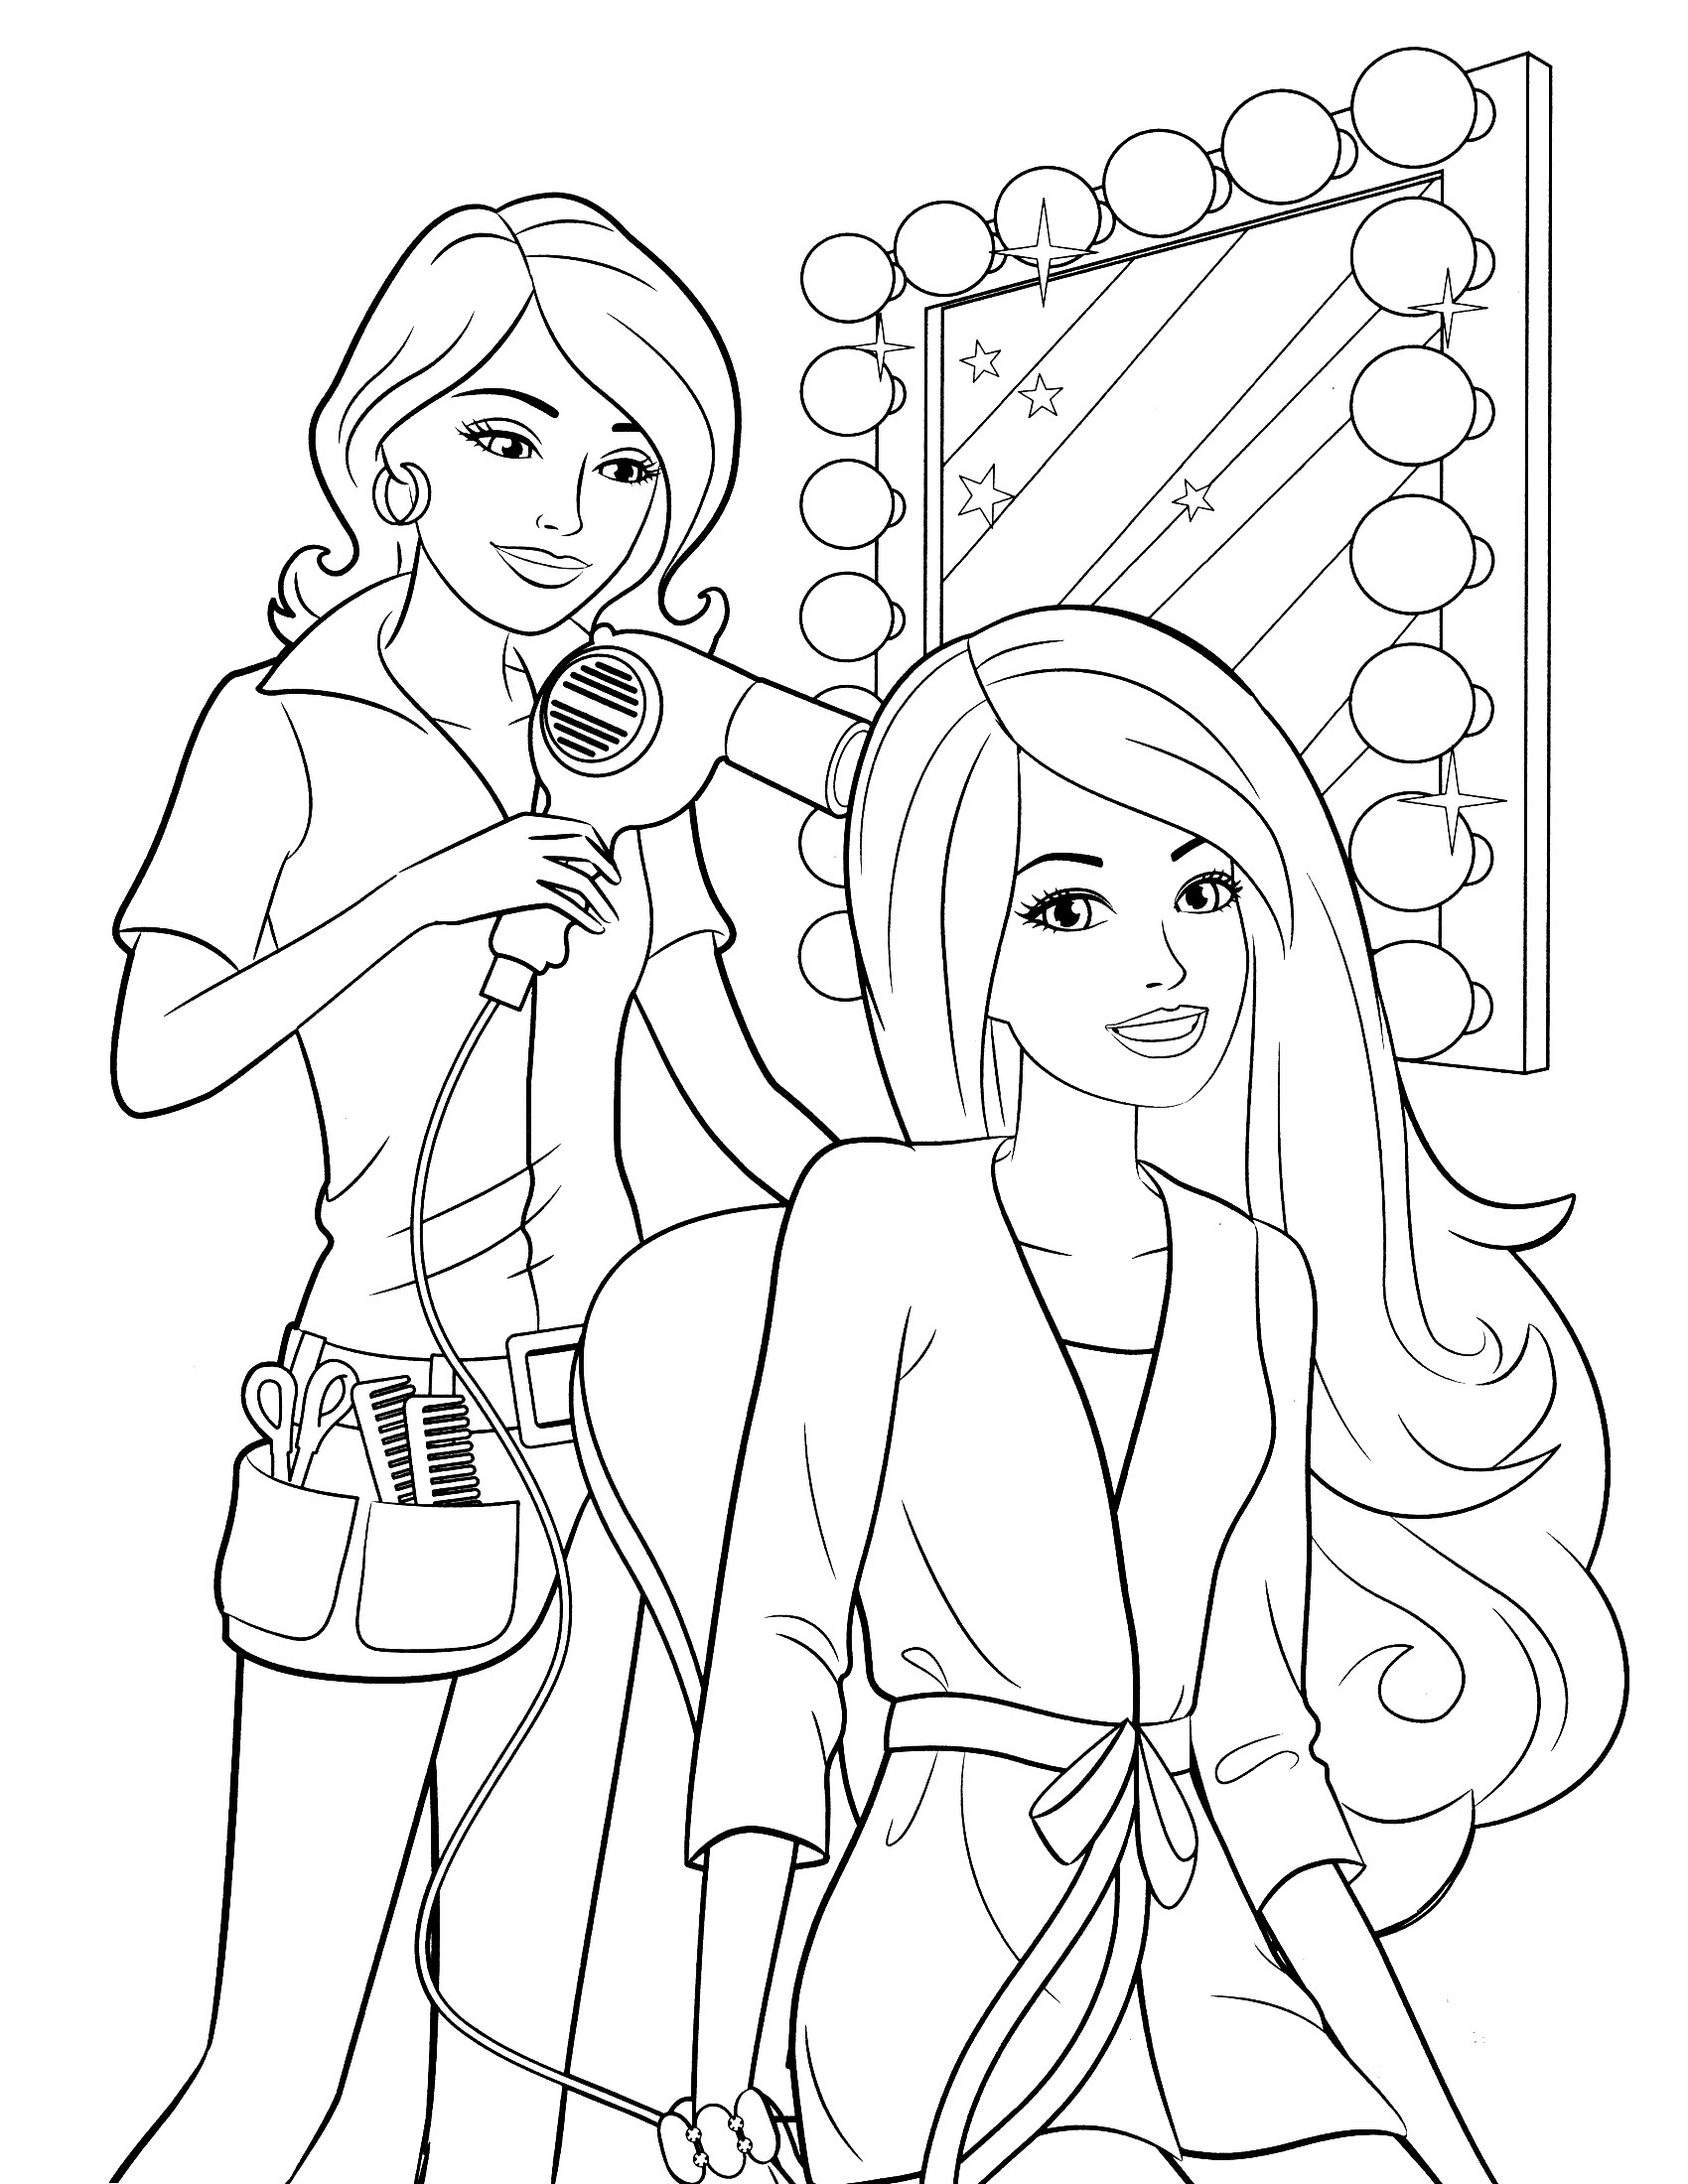 Coloring Pages For Girls To Print
 Coloring Pages for Girls Best Coloring Pages For Kids